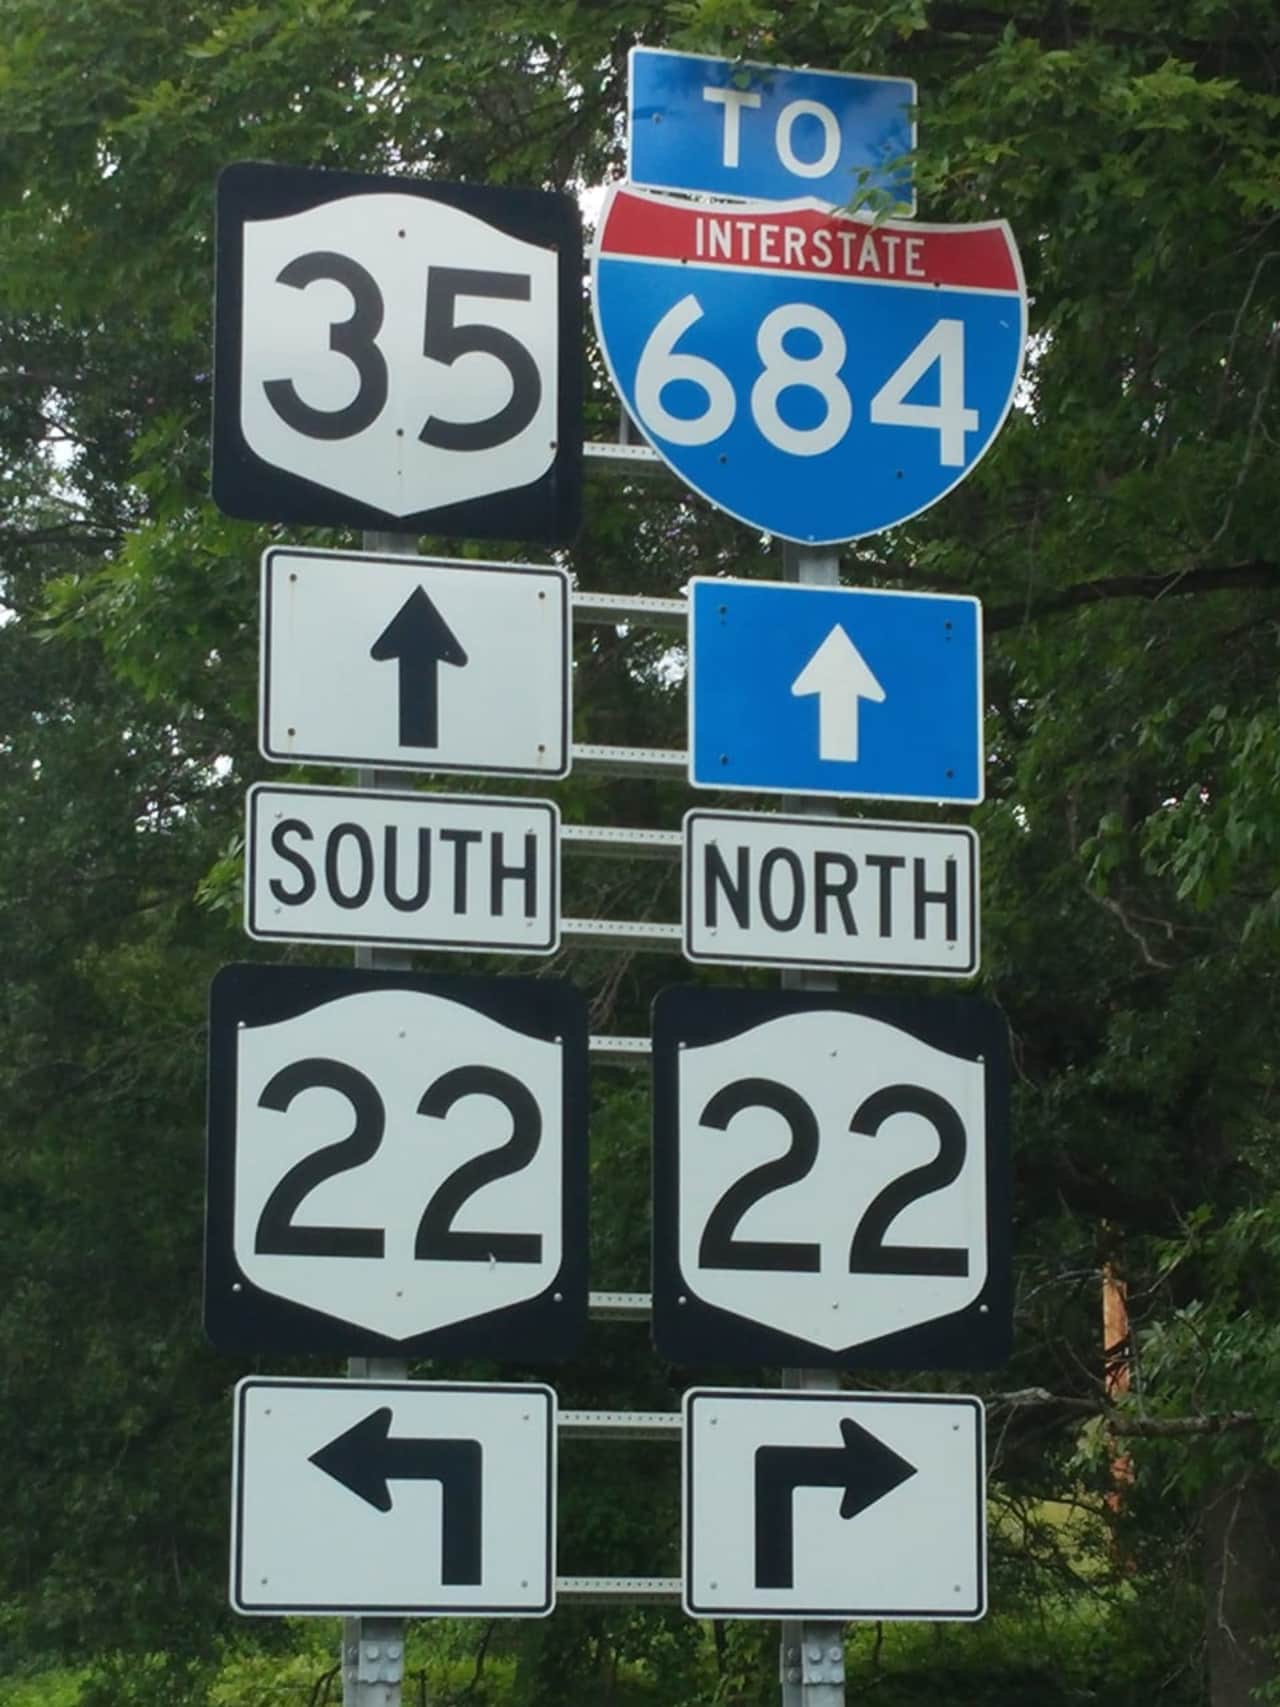 Route 35, Route 22, I-684